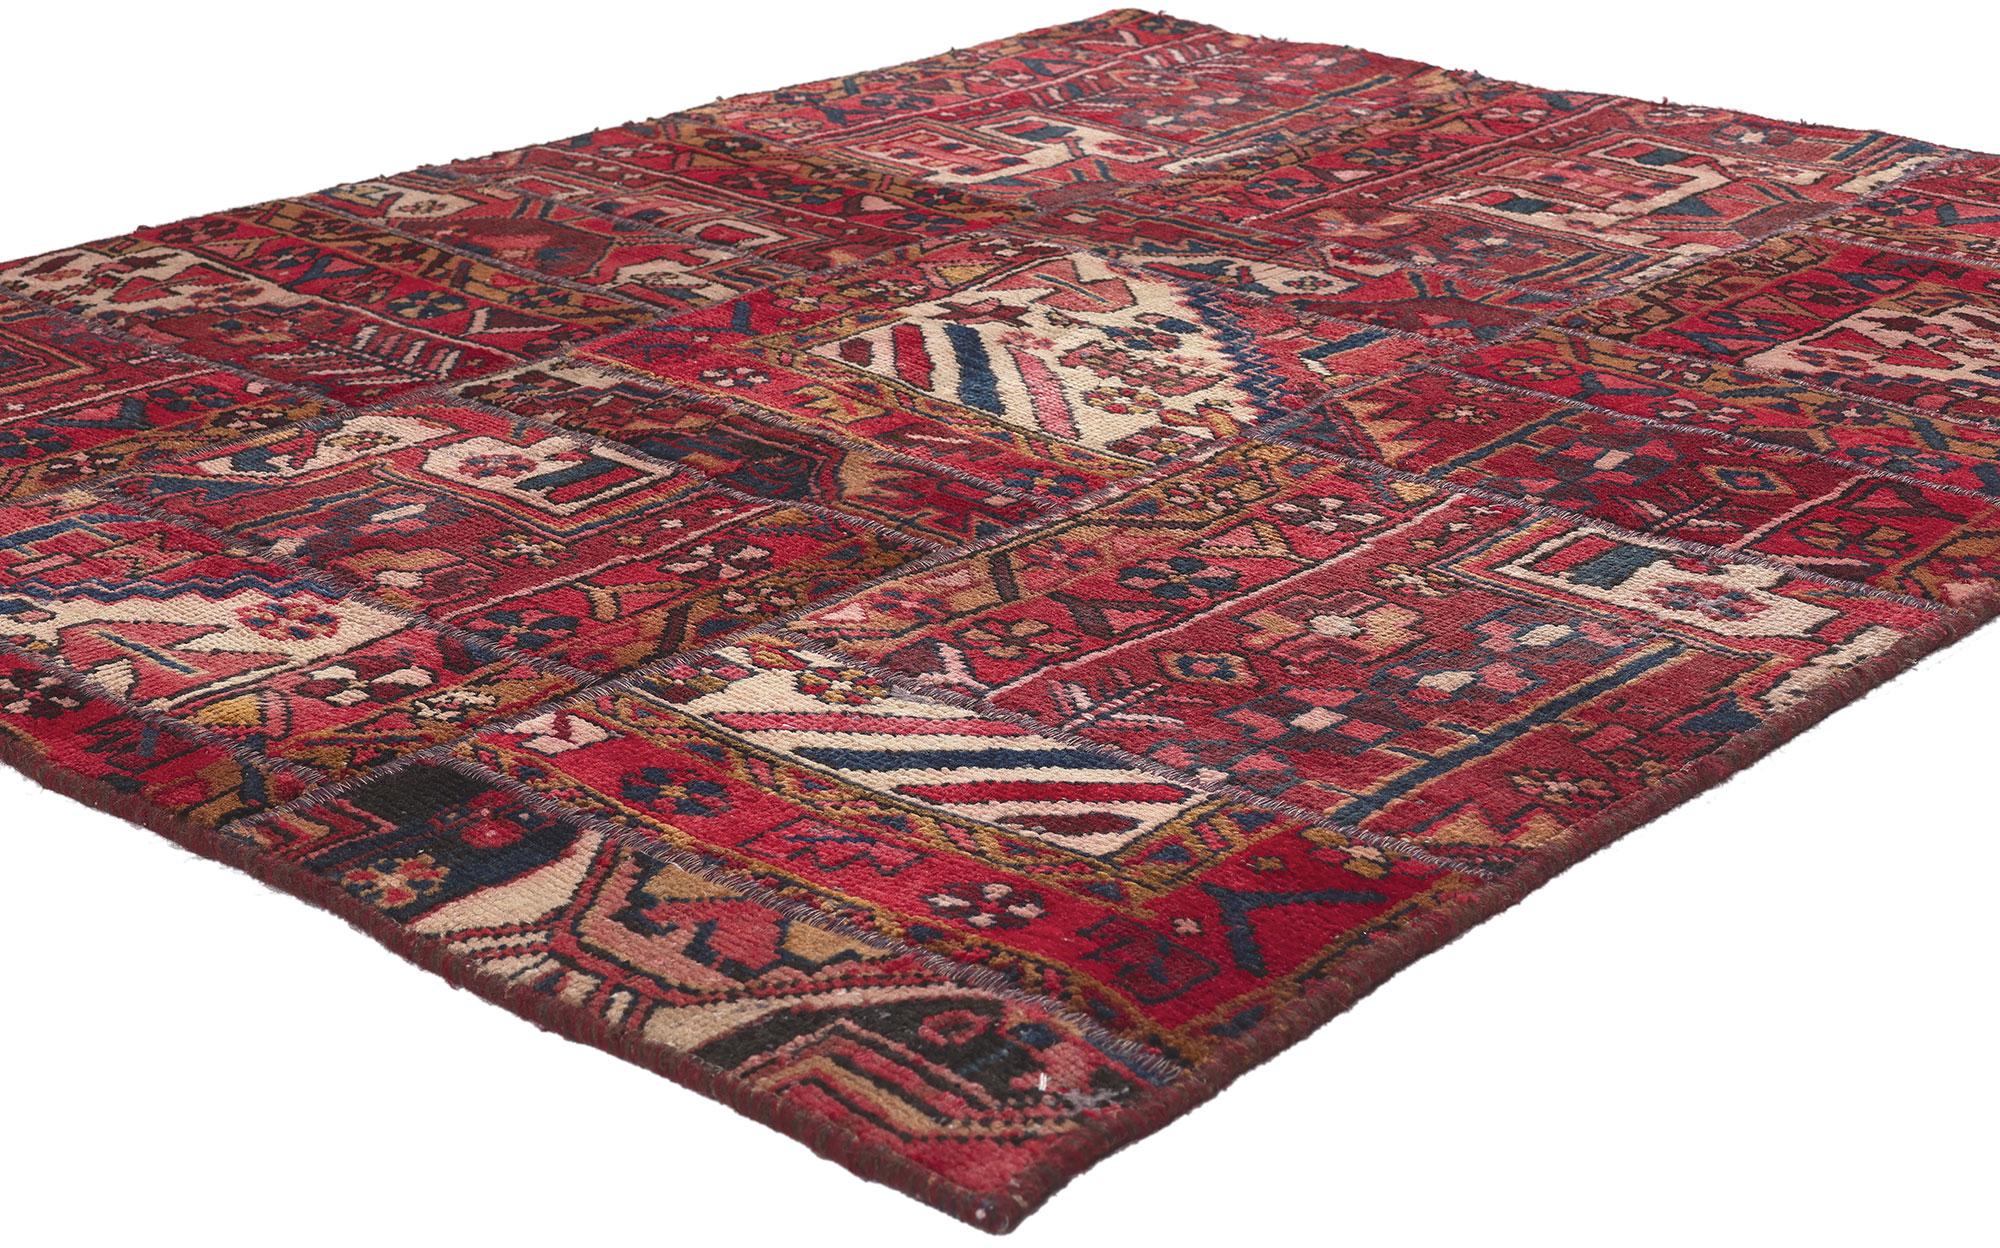 78578 Vintage Persian Patchwork Rug, 04'03 x 05'04. 
Emanating bucolic charm and traditional sensibility, this vintage Persian patchwork rug is a captivating vision of woven beauty. The Bakhtiari designs and traditional color palette woven into this